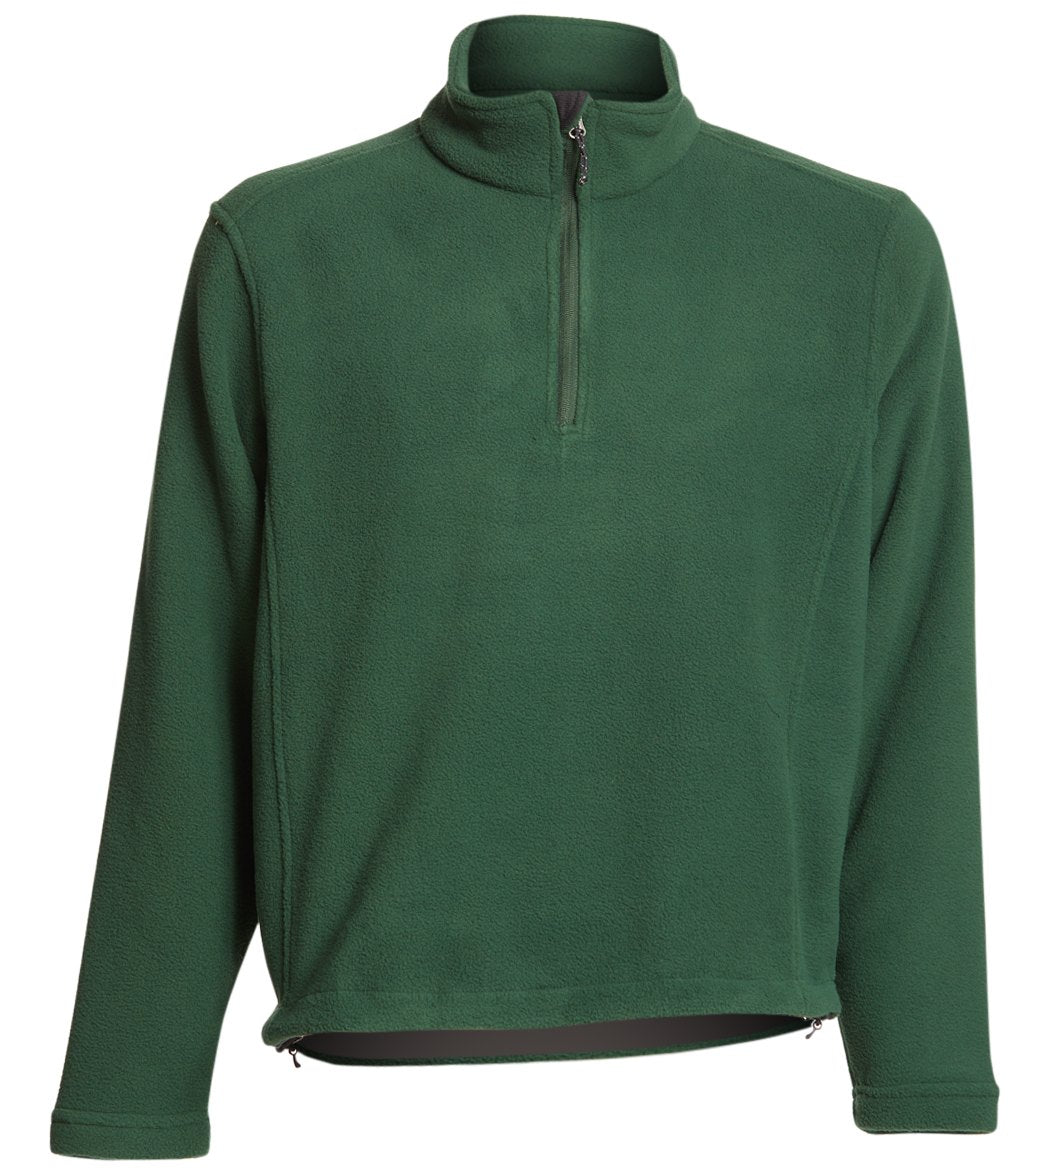 Adult Men's Fleece 1/4-Zip Pullover - Forest Green Large Polyester - Swimoutlet.com